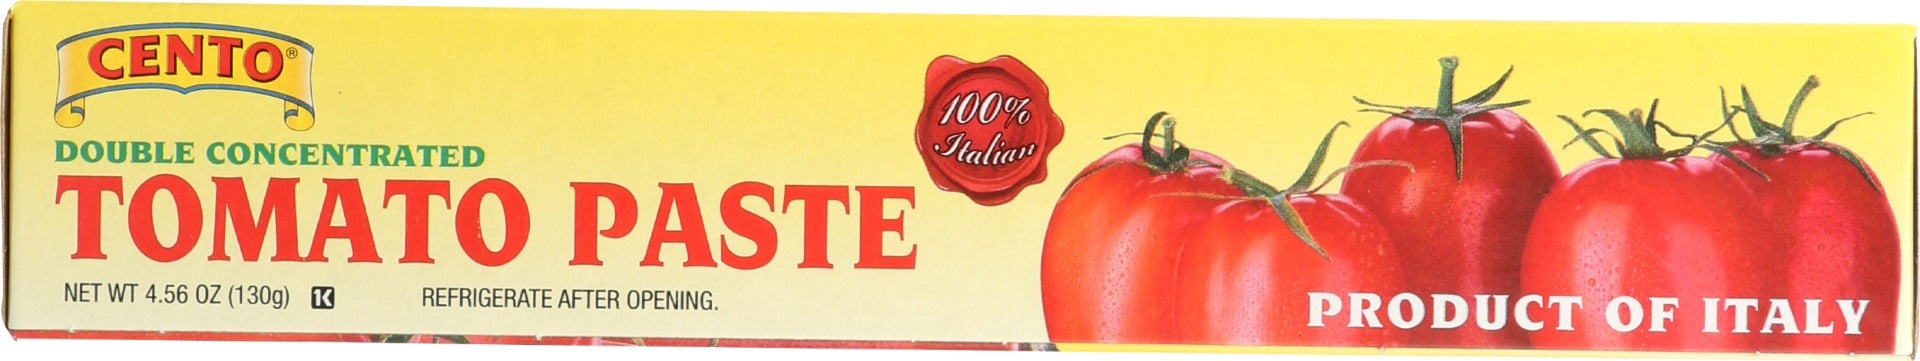 CENTO: Double Concentrated Tomato Paste, 4.56 oz